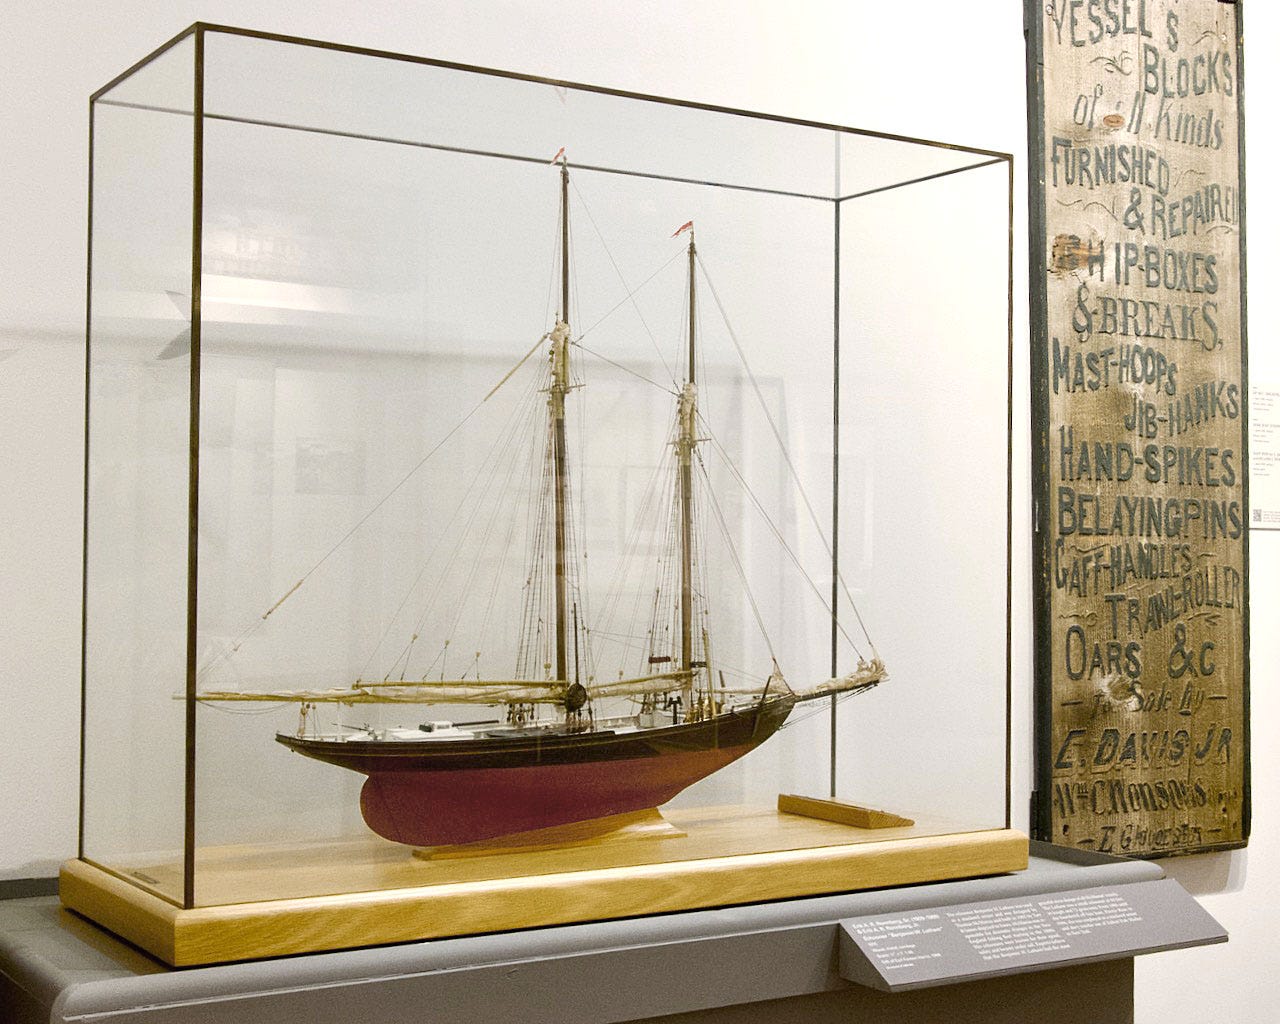 A model of a boat in a glass case

Description automatically generated